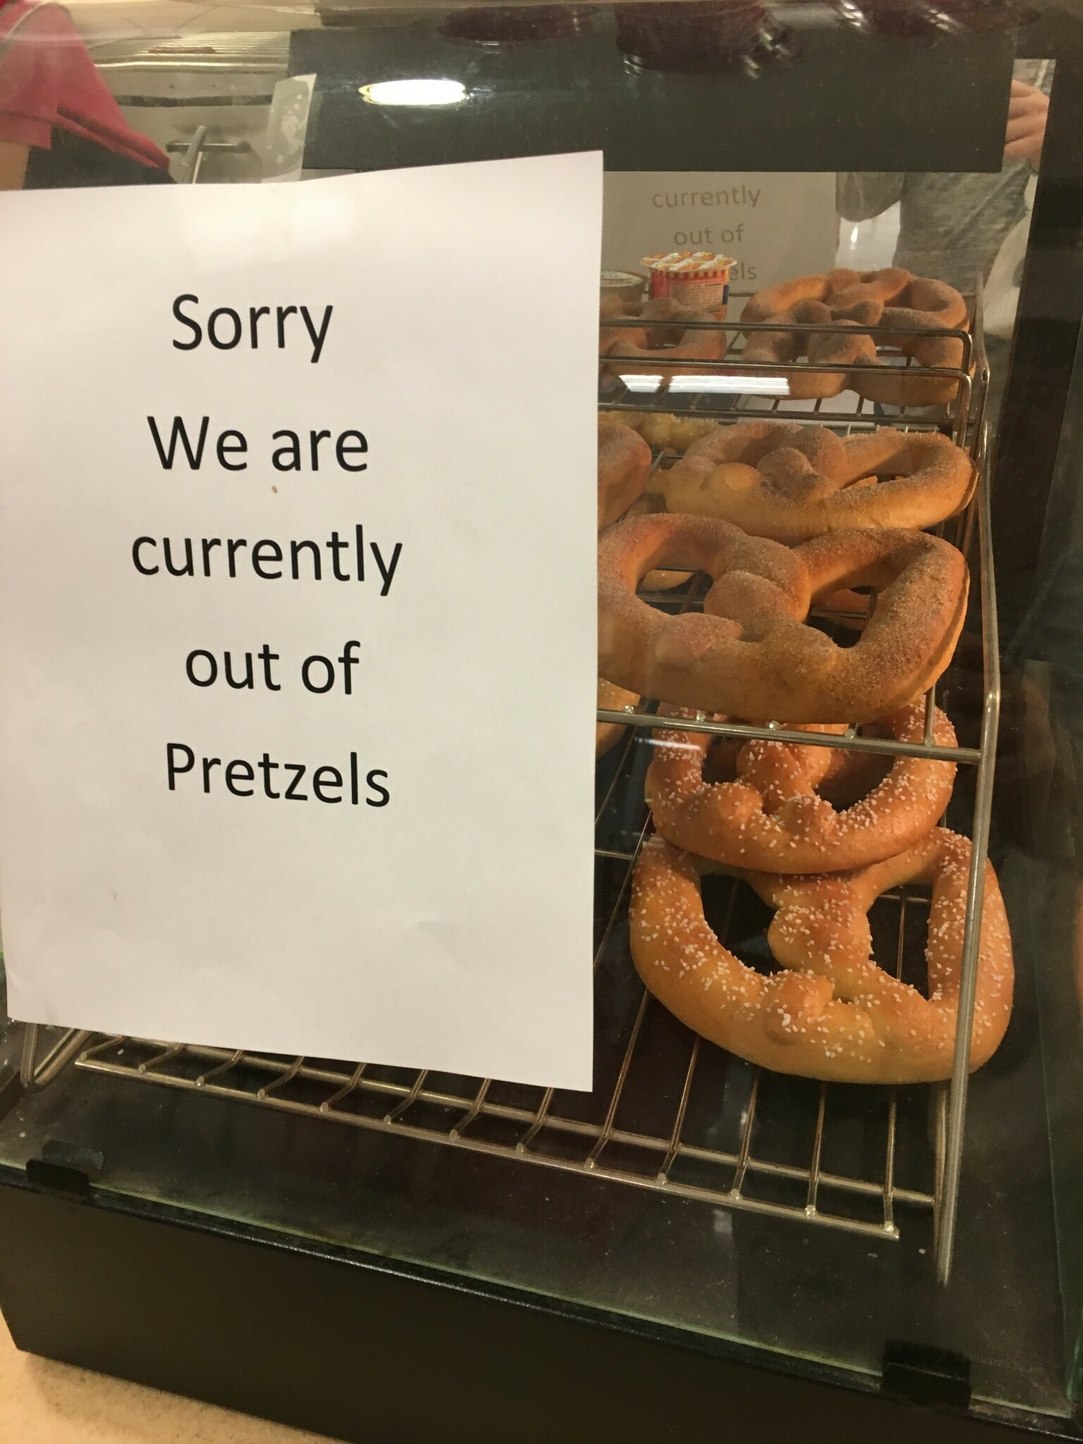 Meanwhile at the CNN food stand - meme